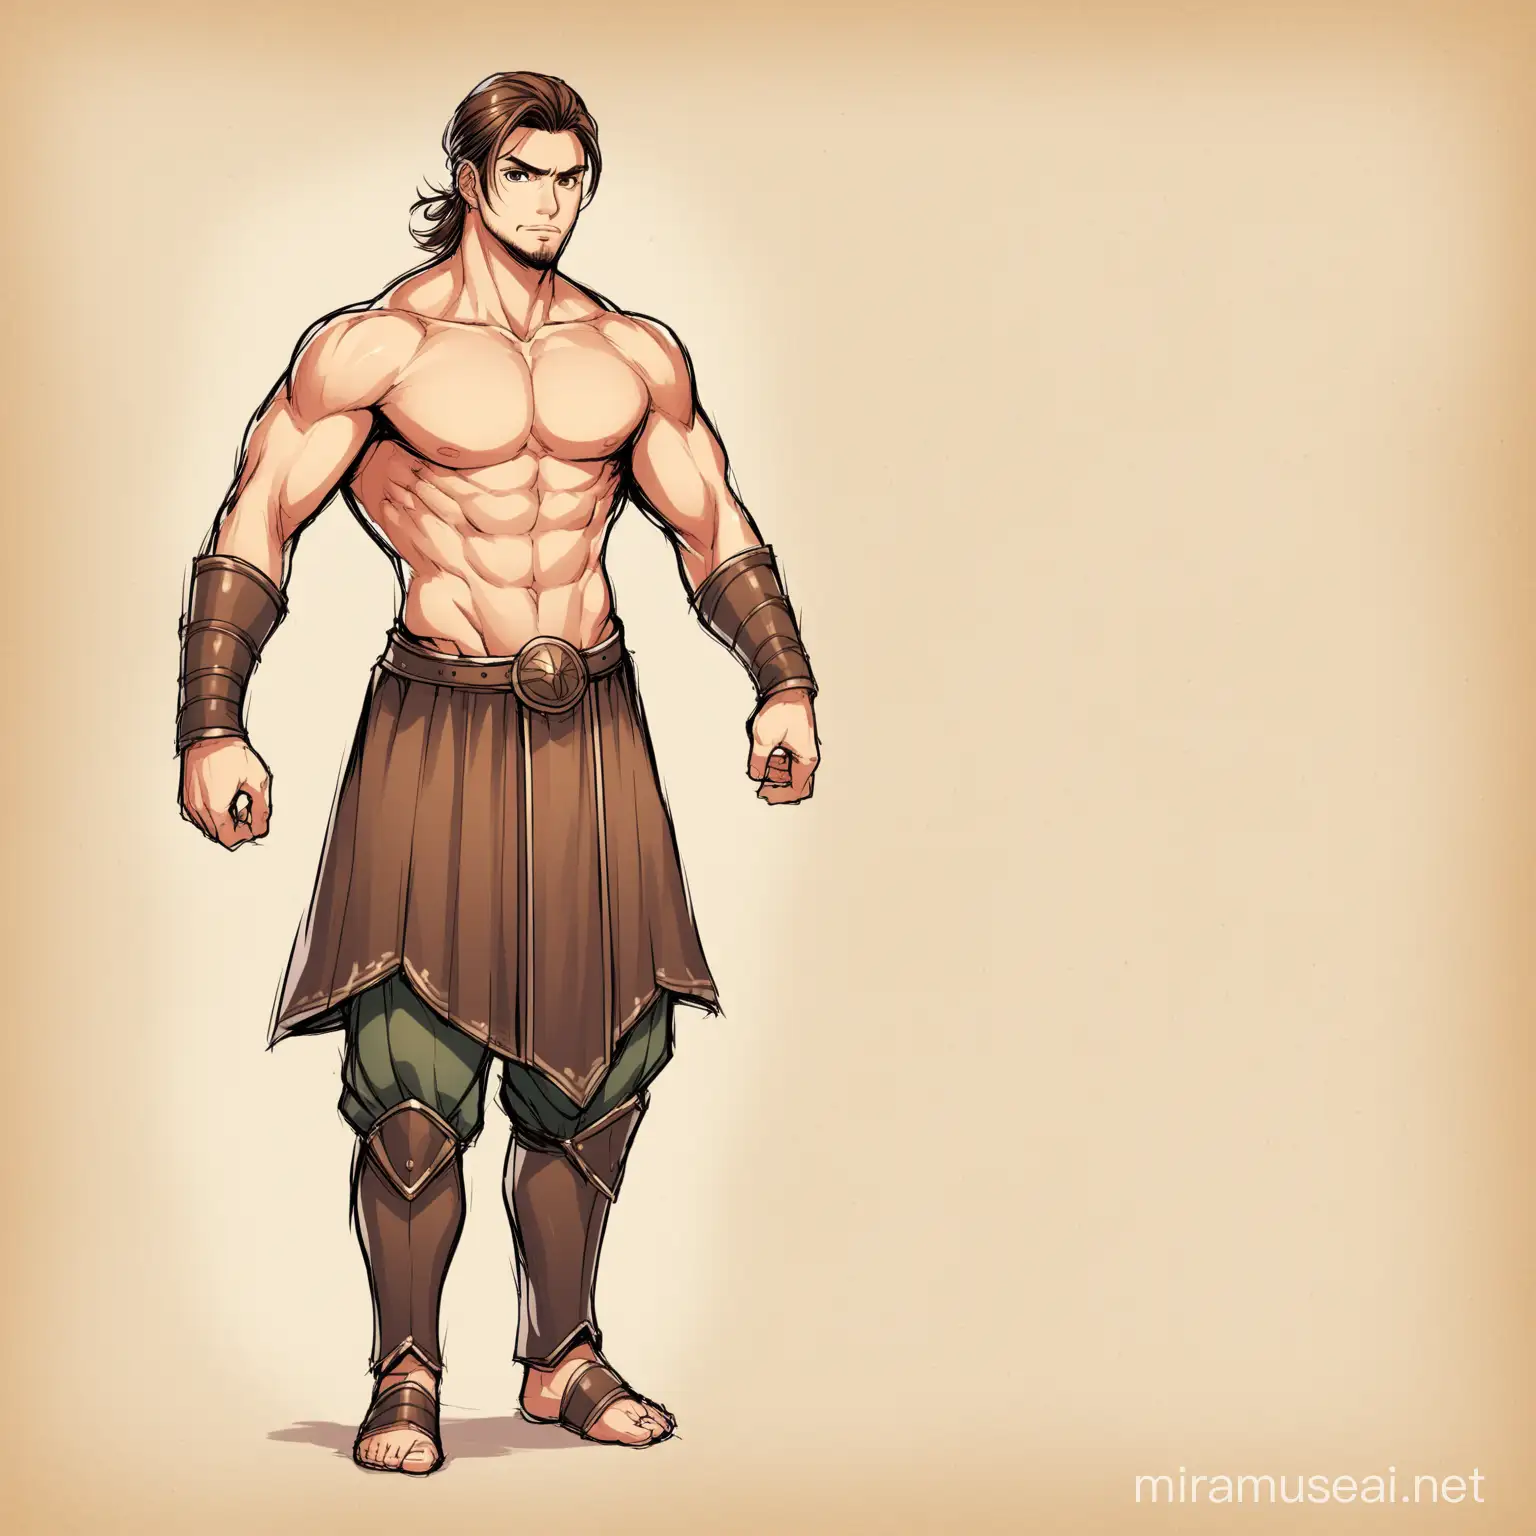 Brave Masculine Warrior with Rotated Brown Hair and Eyes